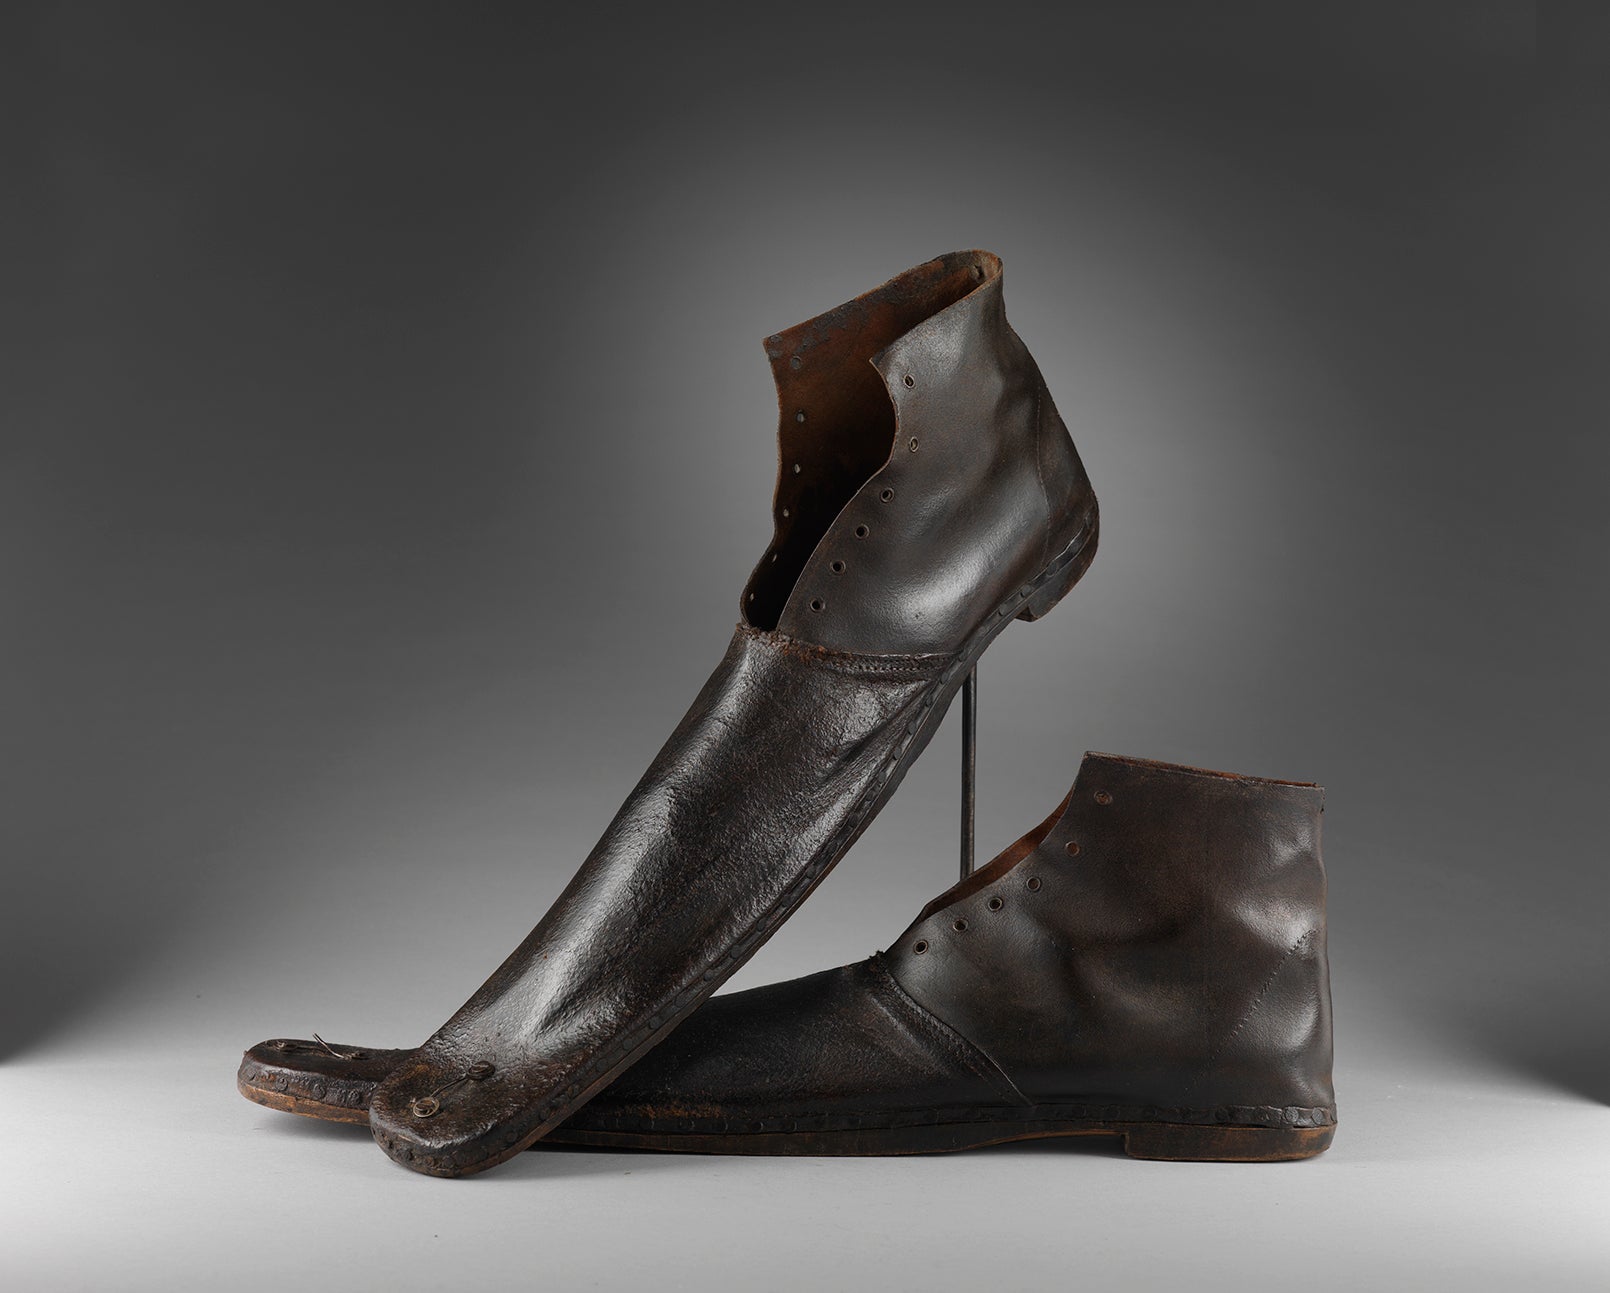 Remarkable Elongated Pair of Clown's Wooden Soled Shoes